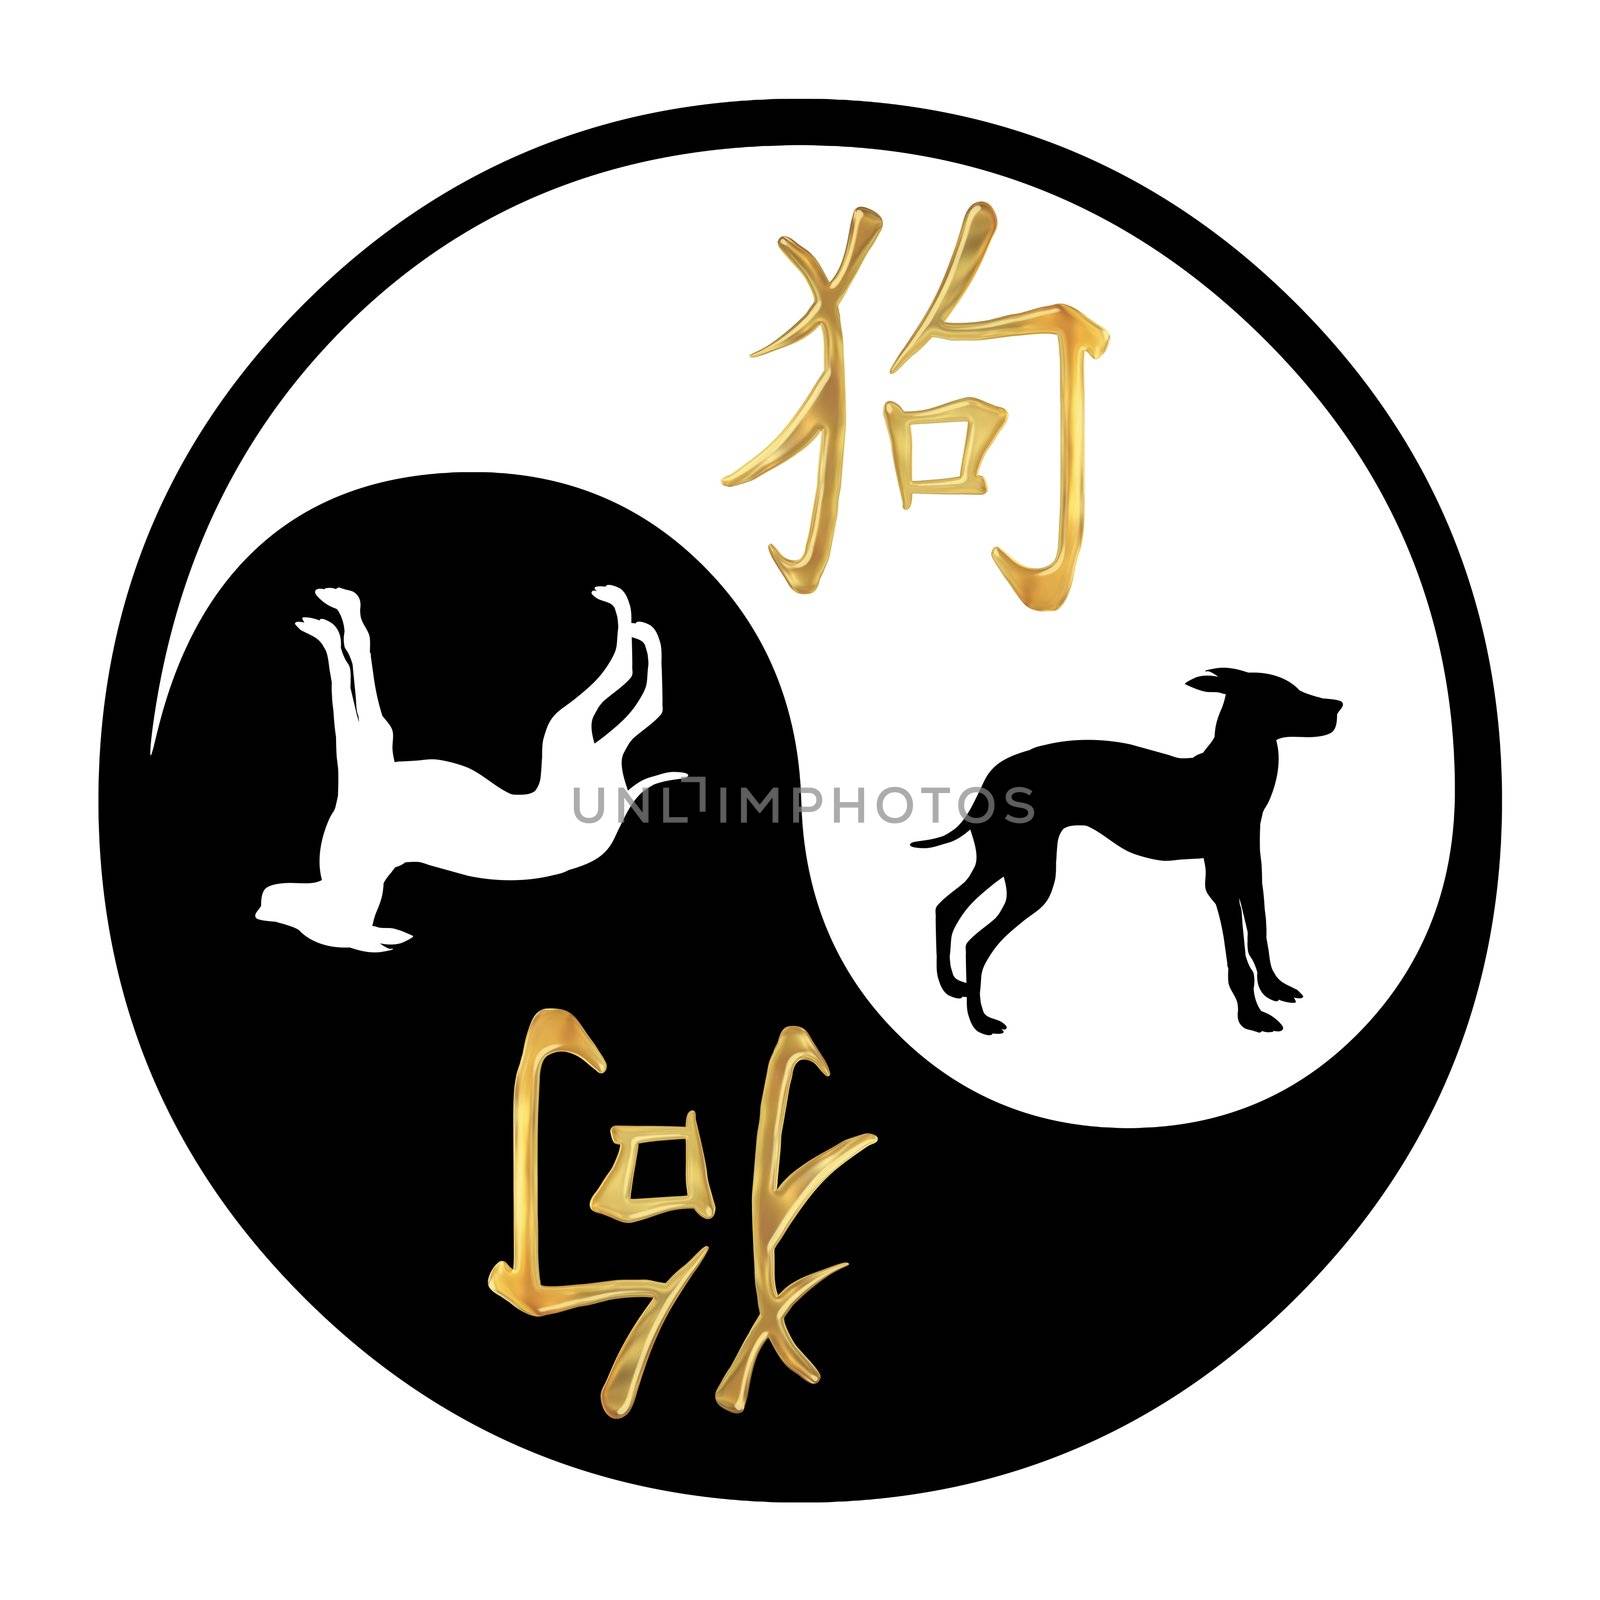 Yin Yang symbol with Chinese text and image of a Dog